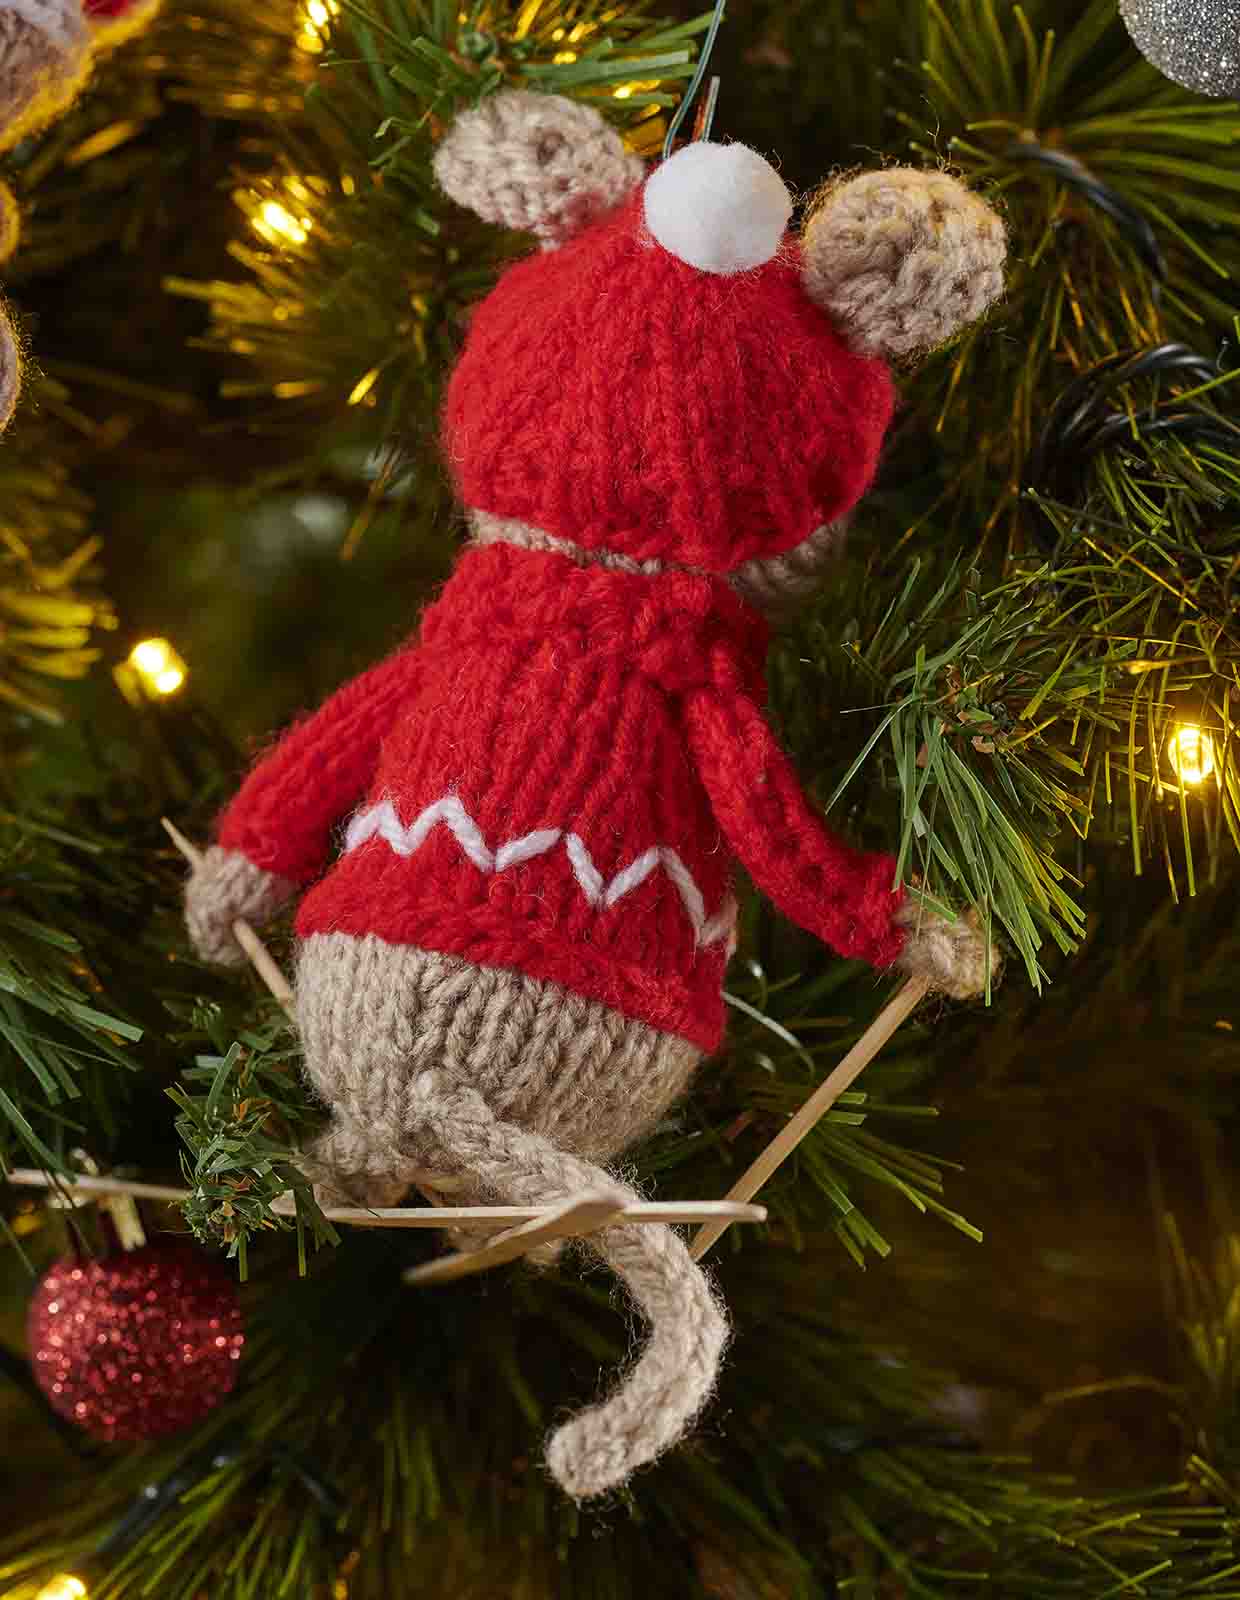 The knitted mouse is seem from behind with his wooden coffee storer skis crossed over under his long icord tail